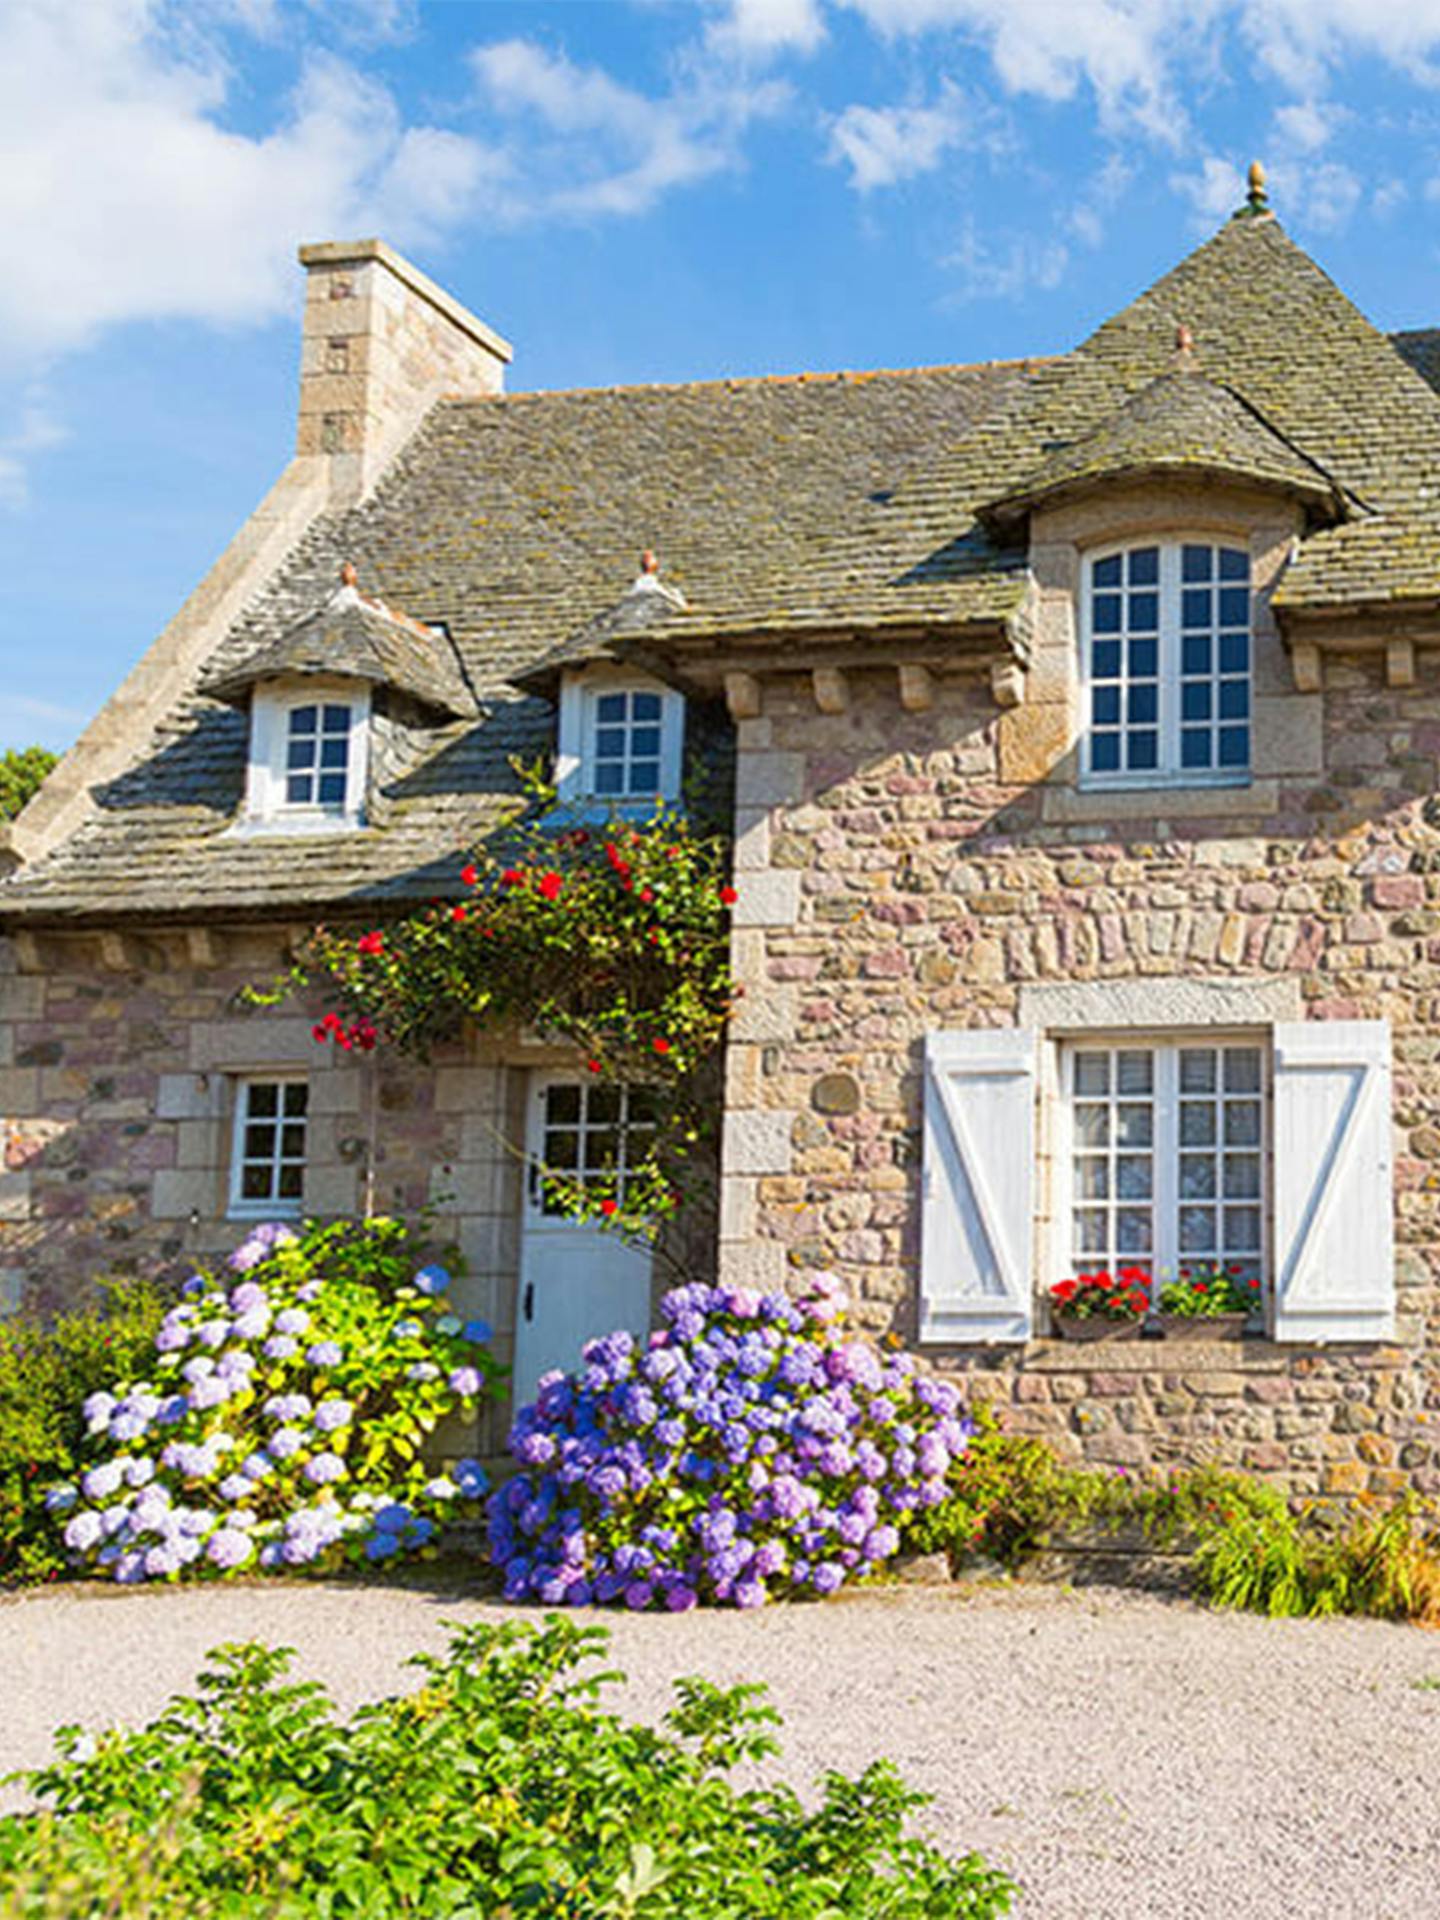 Exterior of a stone cottage surrounded by flowers during the day